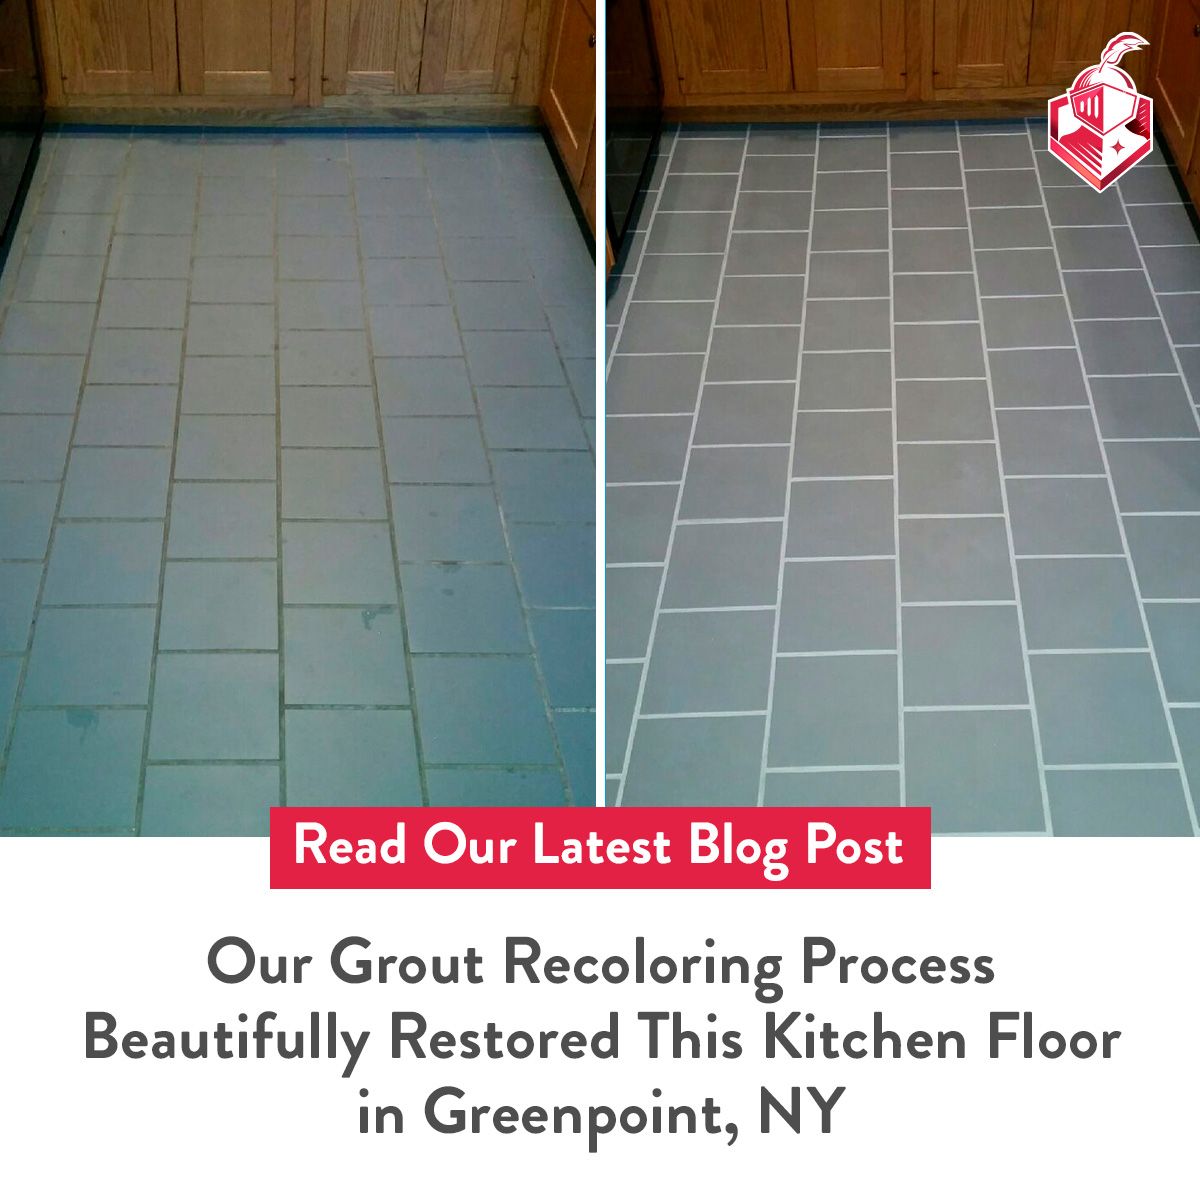 Our Grout Recoloring Process Beautifully Restored This Kitchen Floor in Greenpoint, NY